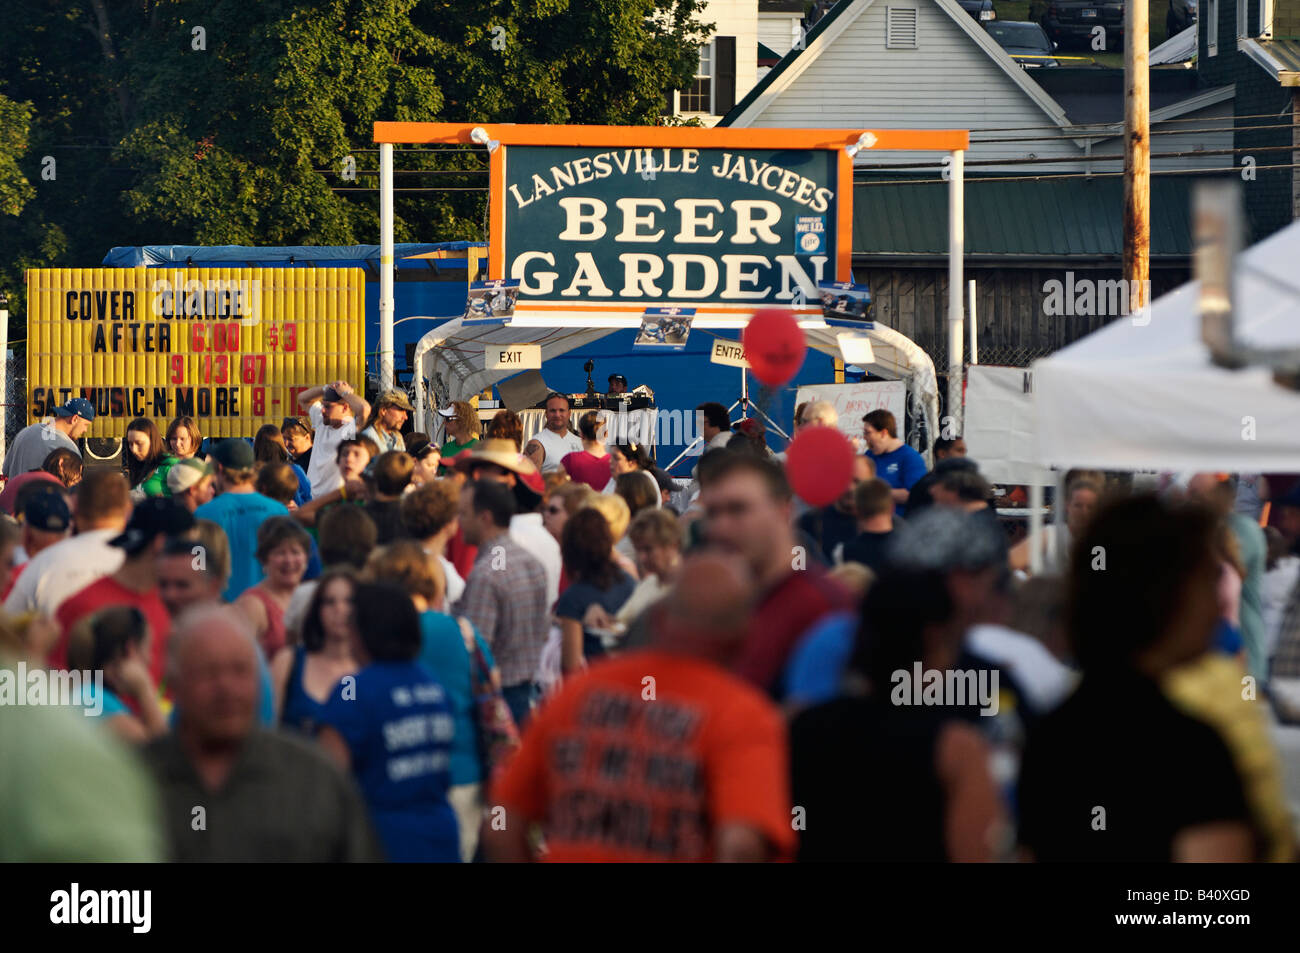 Crowd in front of a Beer Garden Sign at a Small Town Festival in Lanesville Indiana Stock Photo